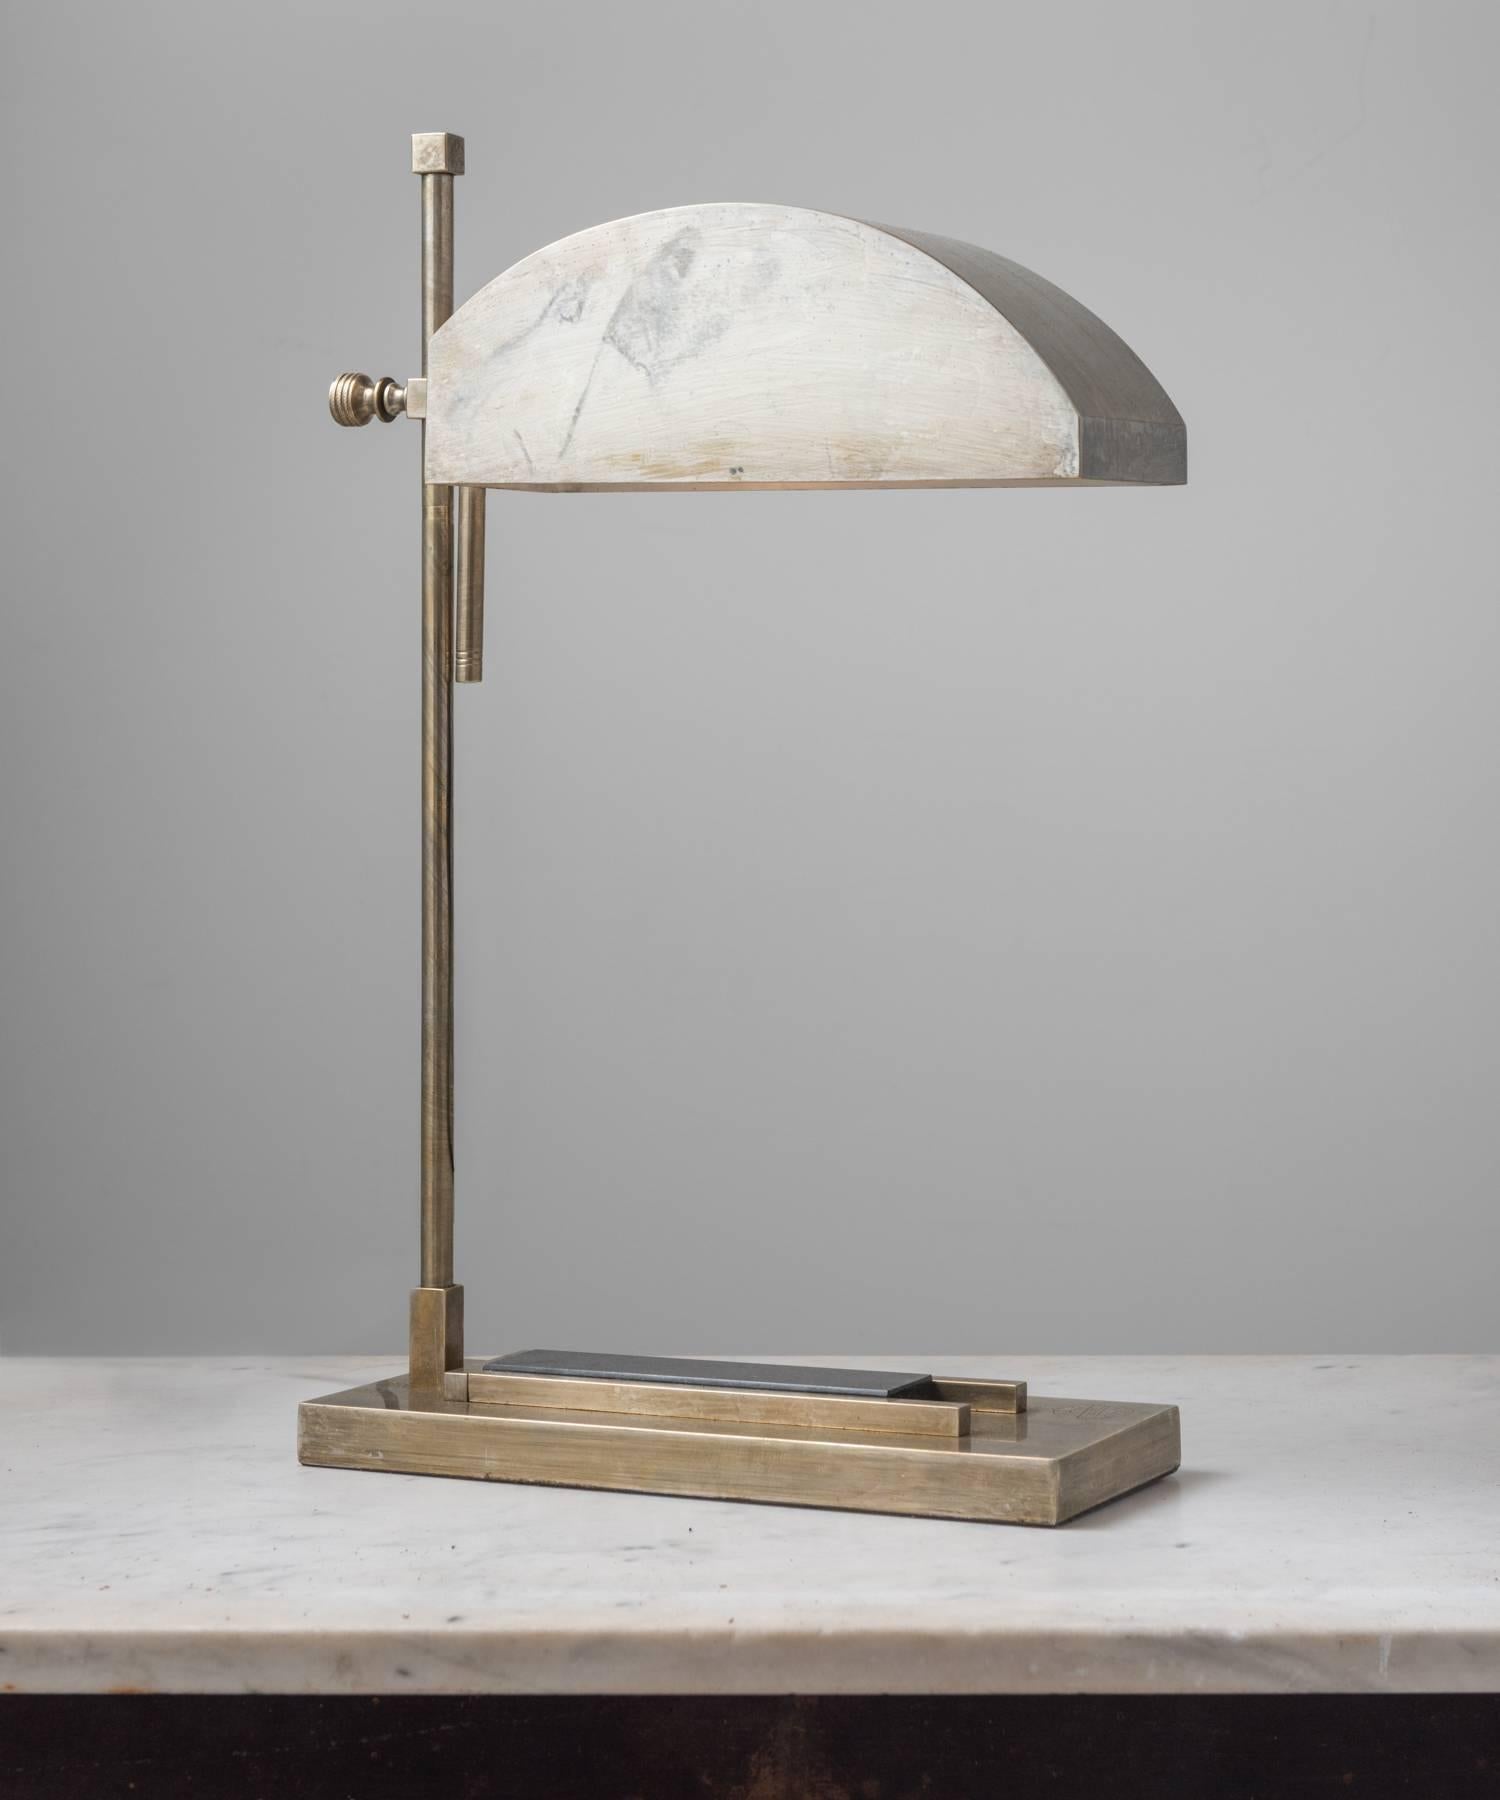 Marcel Breuer desk lamp, made in Germany, circa 1925.

Created for the International exposition of modern Industrial and decorative arts, in Paris; brass plated nickel and stamped “Exposition Paris, 1925”.

Adjustable height, with inset black